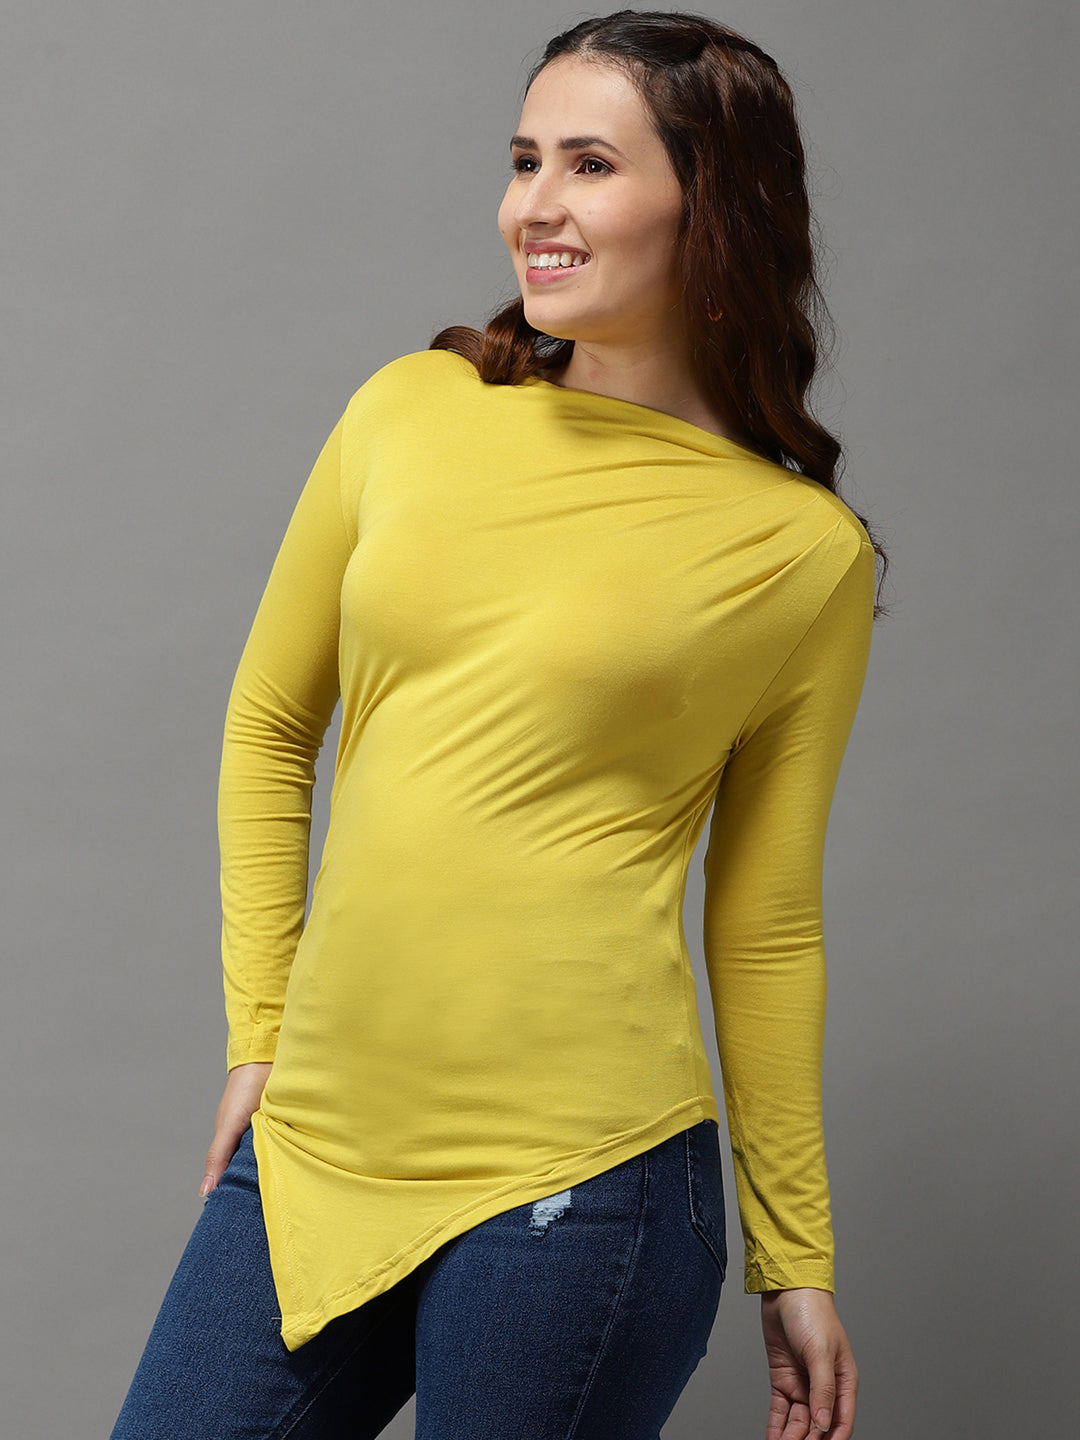 Women High Neck Solid Yellow Fitted Top